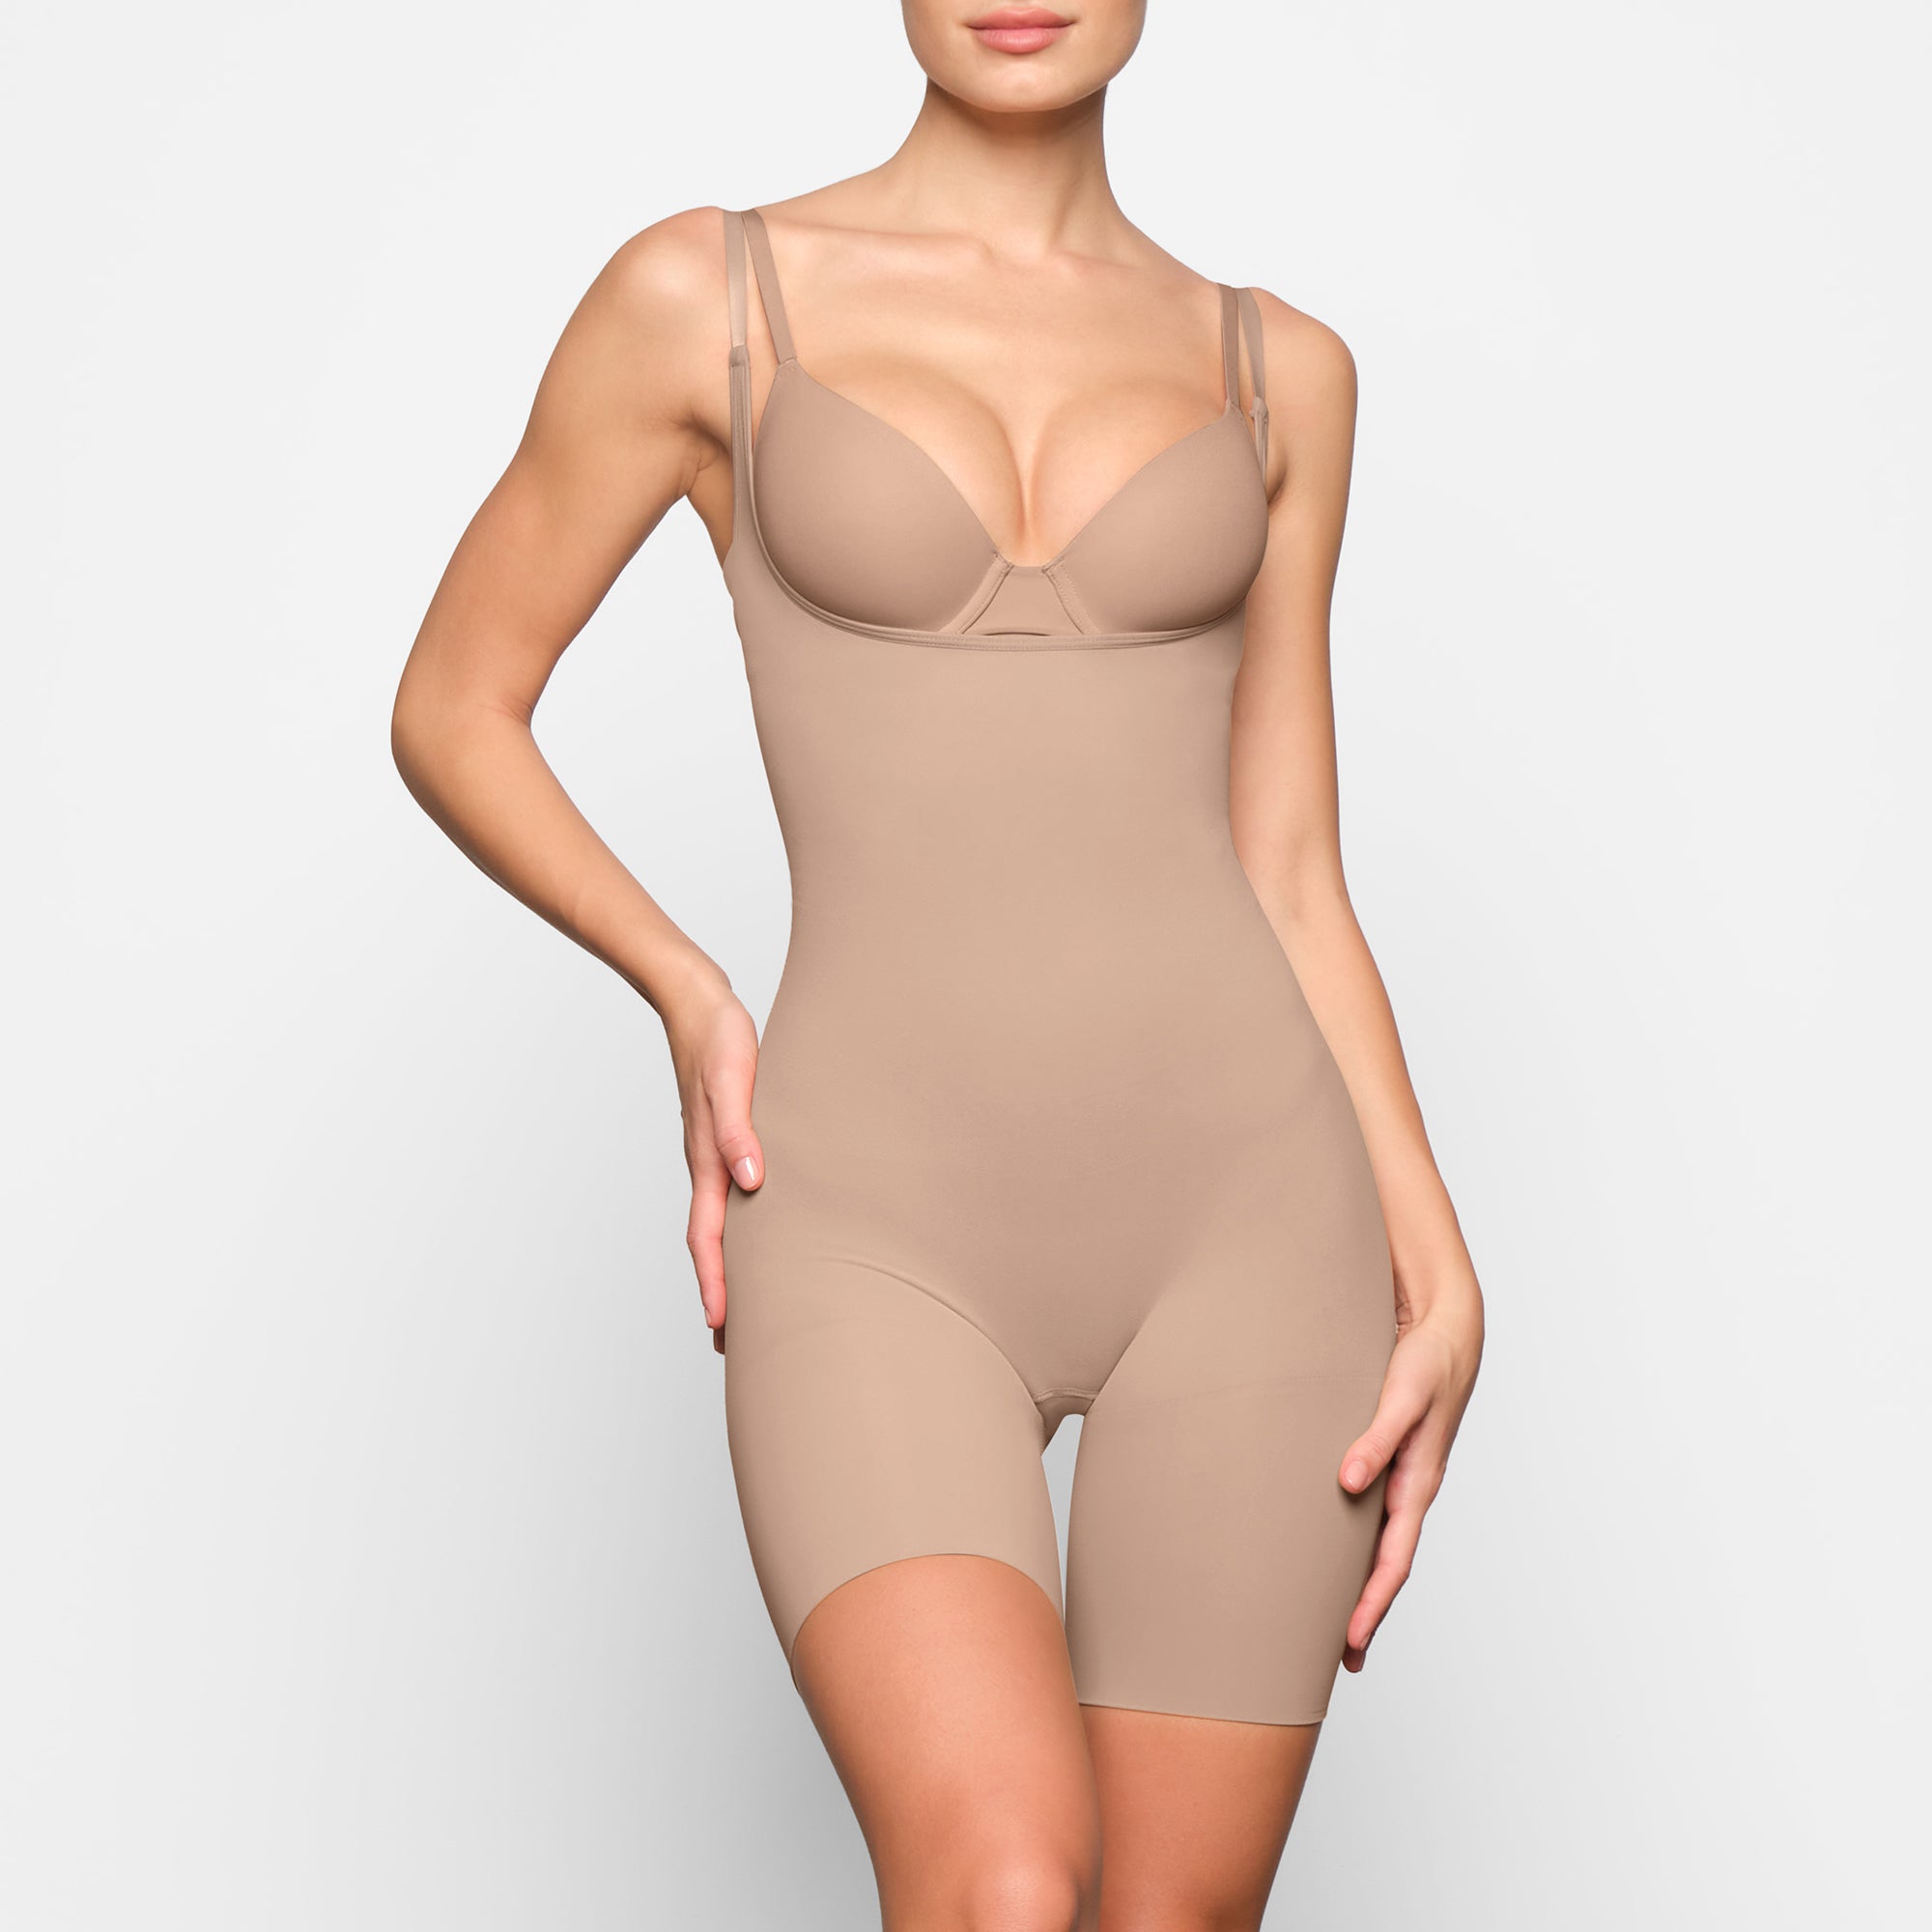 SKIMS - Got your back. Our new Butt-Enhancing Shapewear solutions feature  large butt pockets that contour your curves to create natural-looking lift.  Join the waitlist